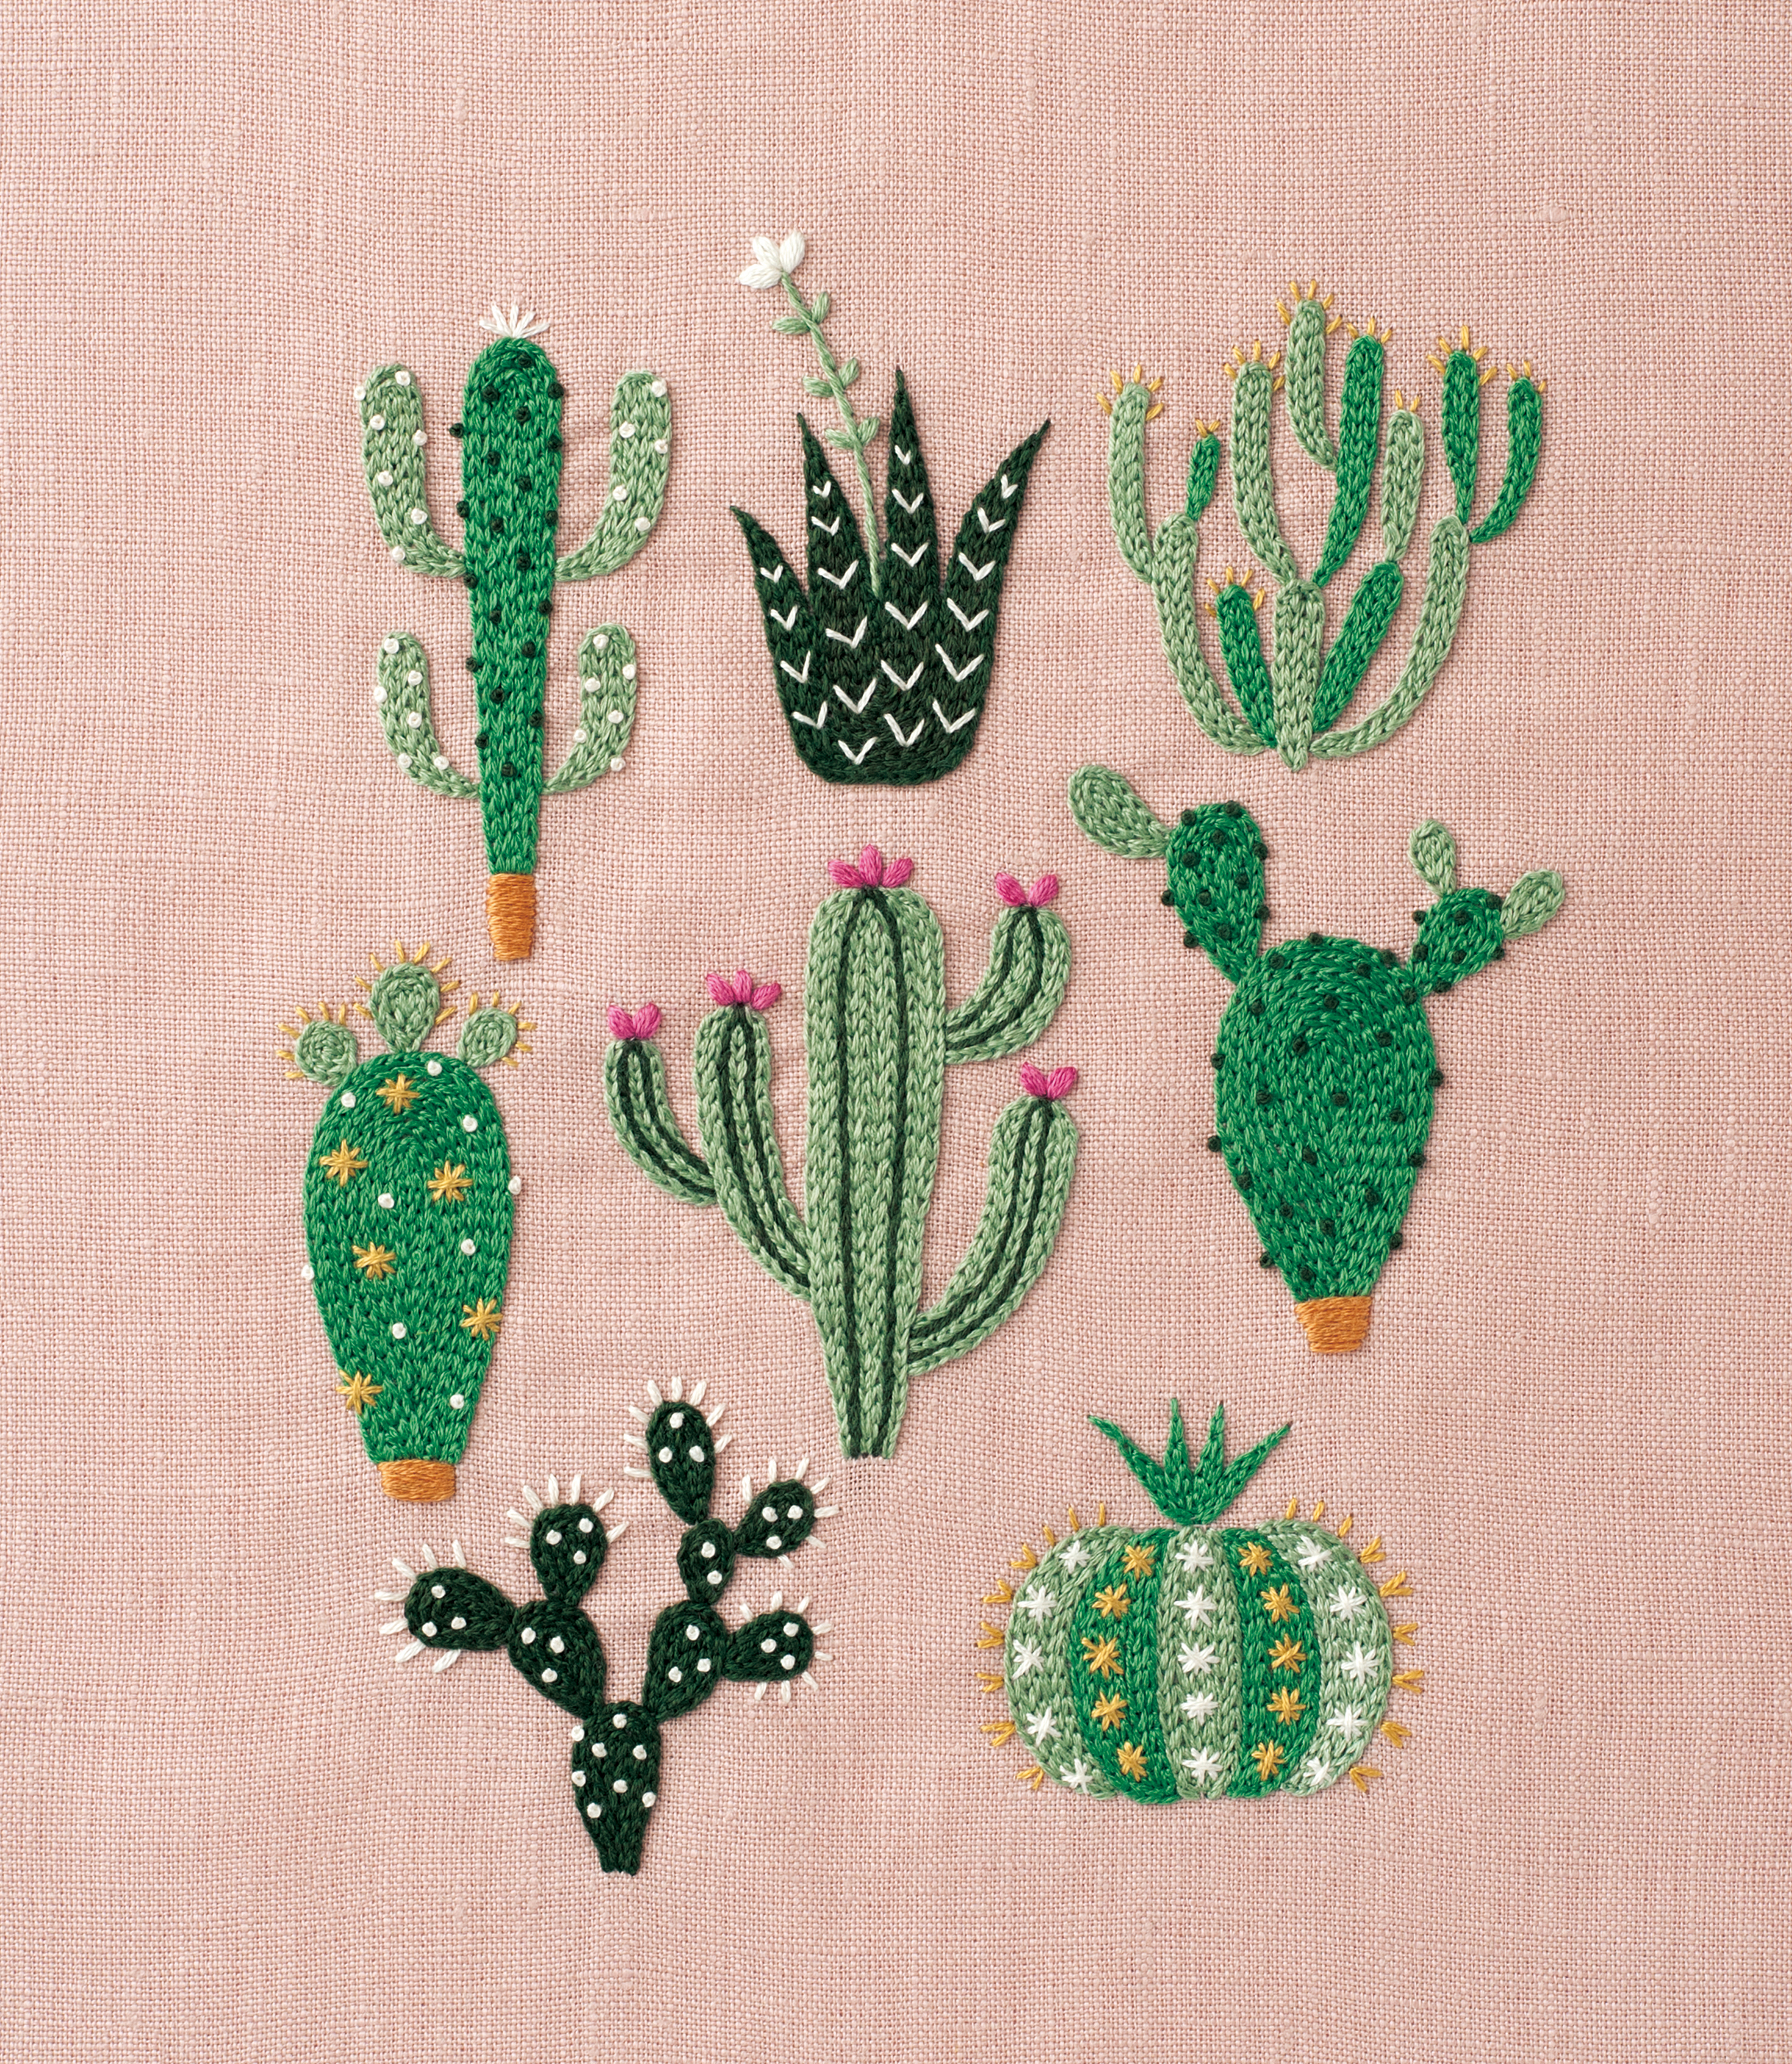 Free Paper Embroidery Patterns And Instructions Diy Floral Cactus Embroidery Projects From A Year Of Embroidery